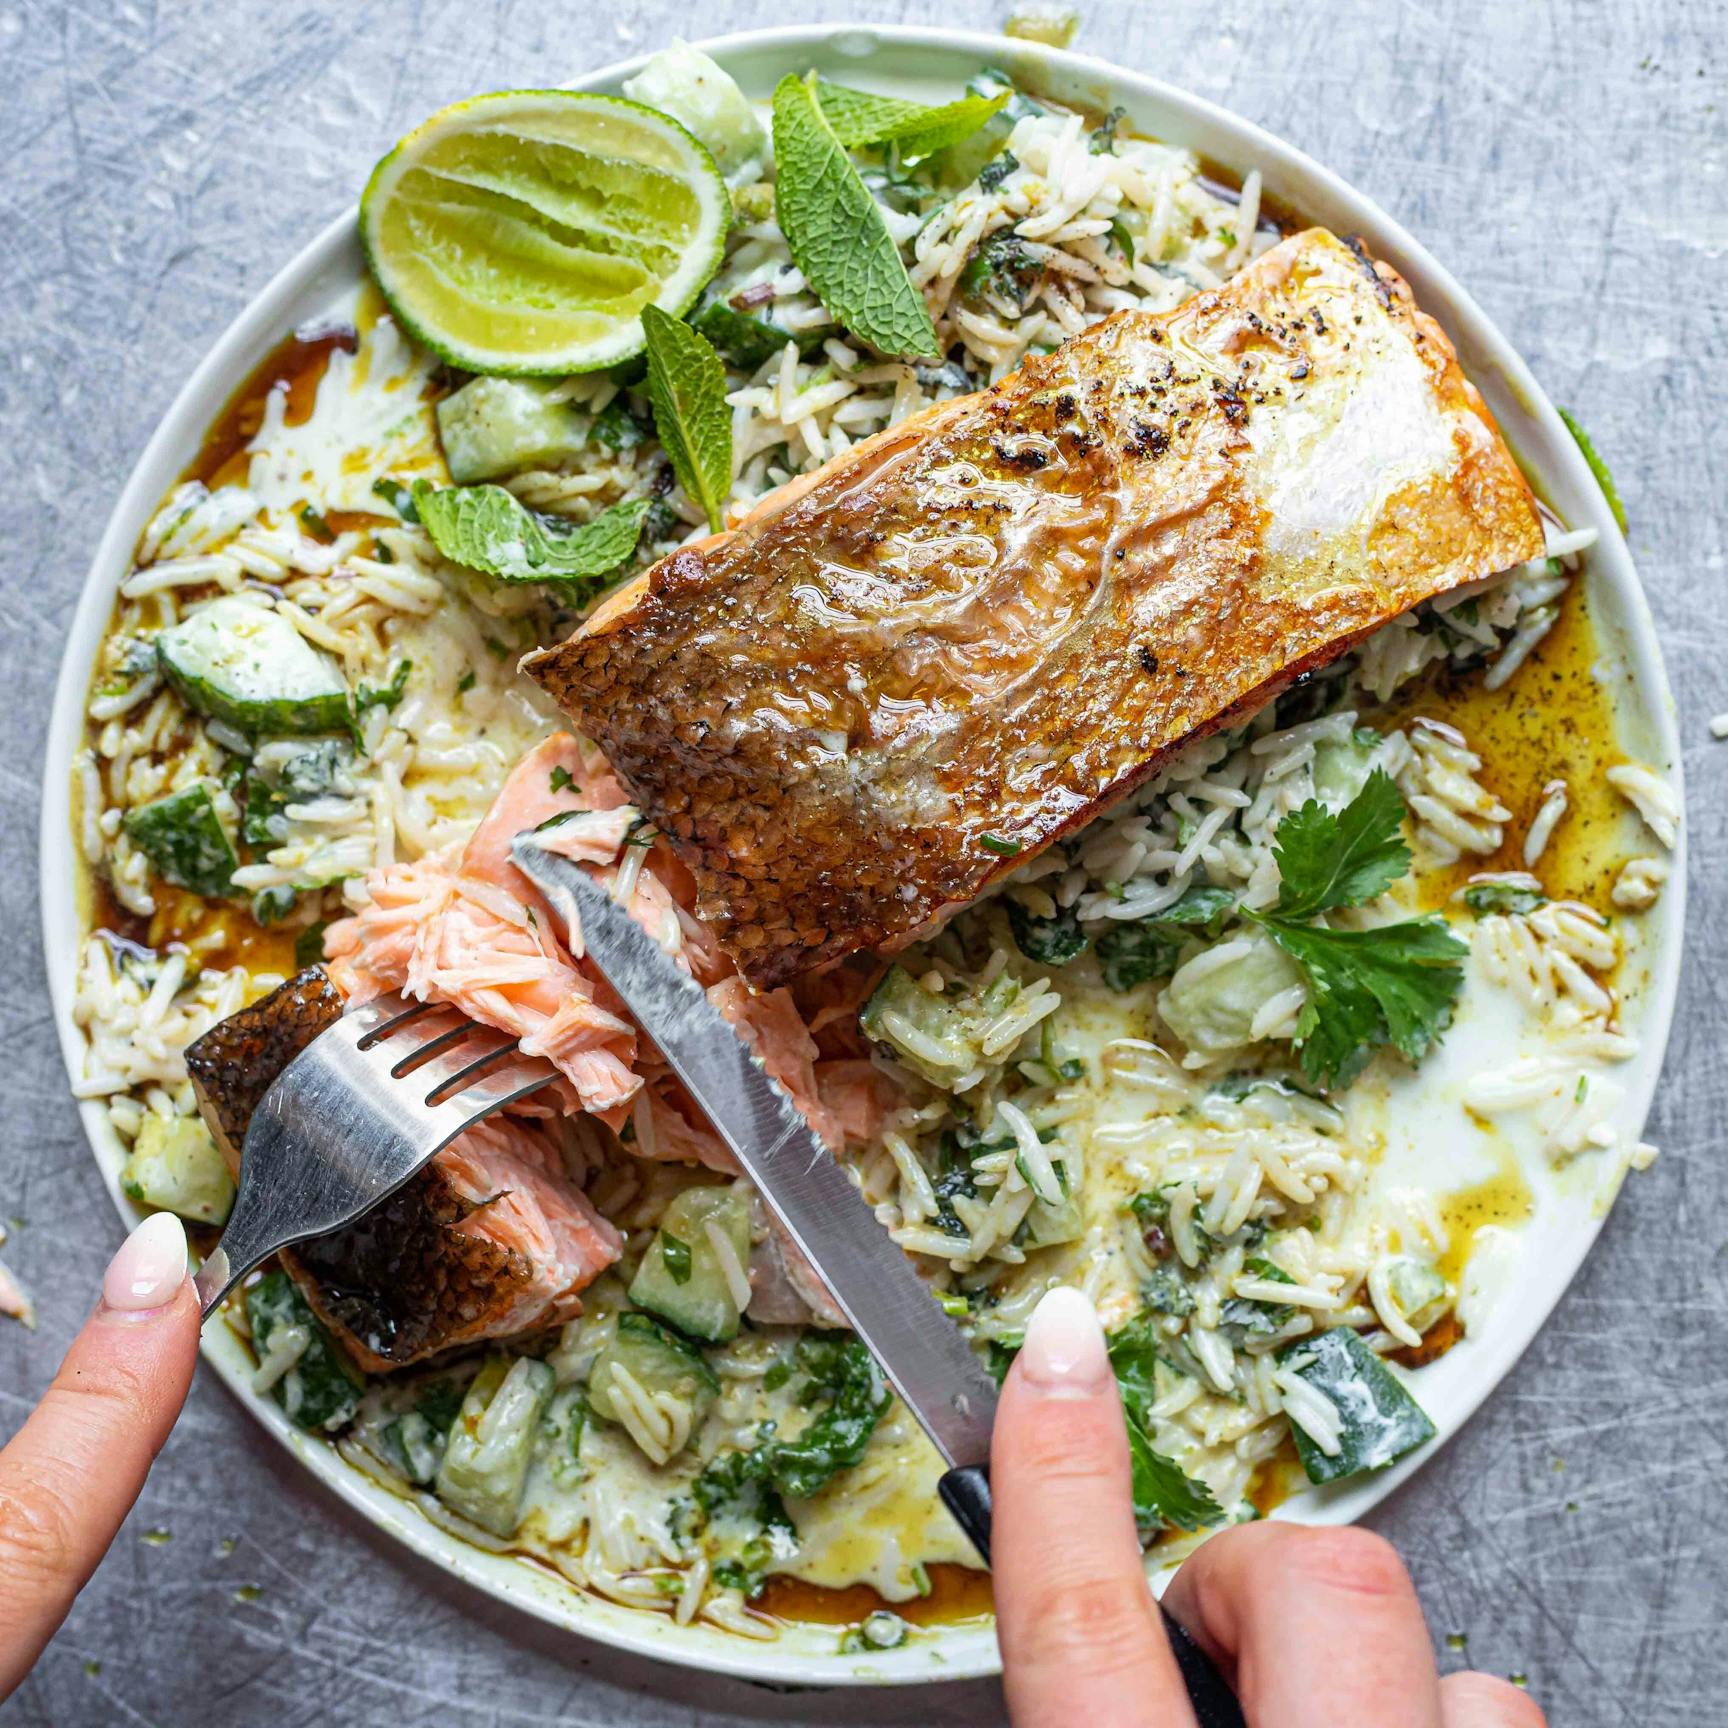 Sizzle Butter Salmon